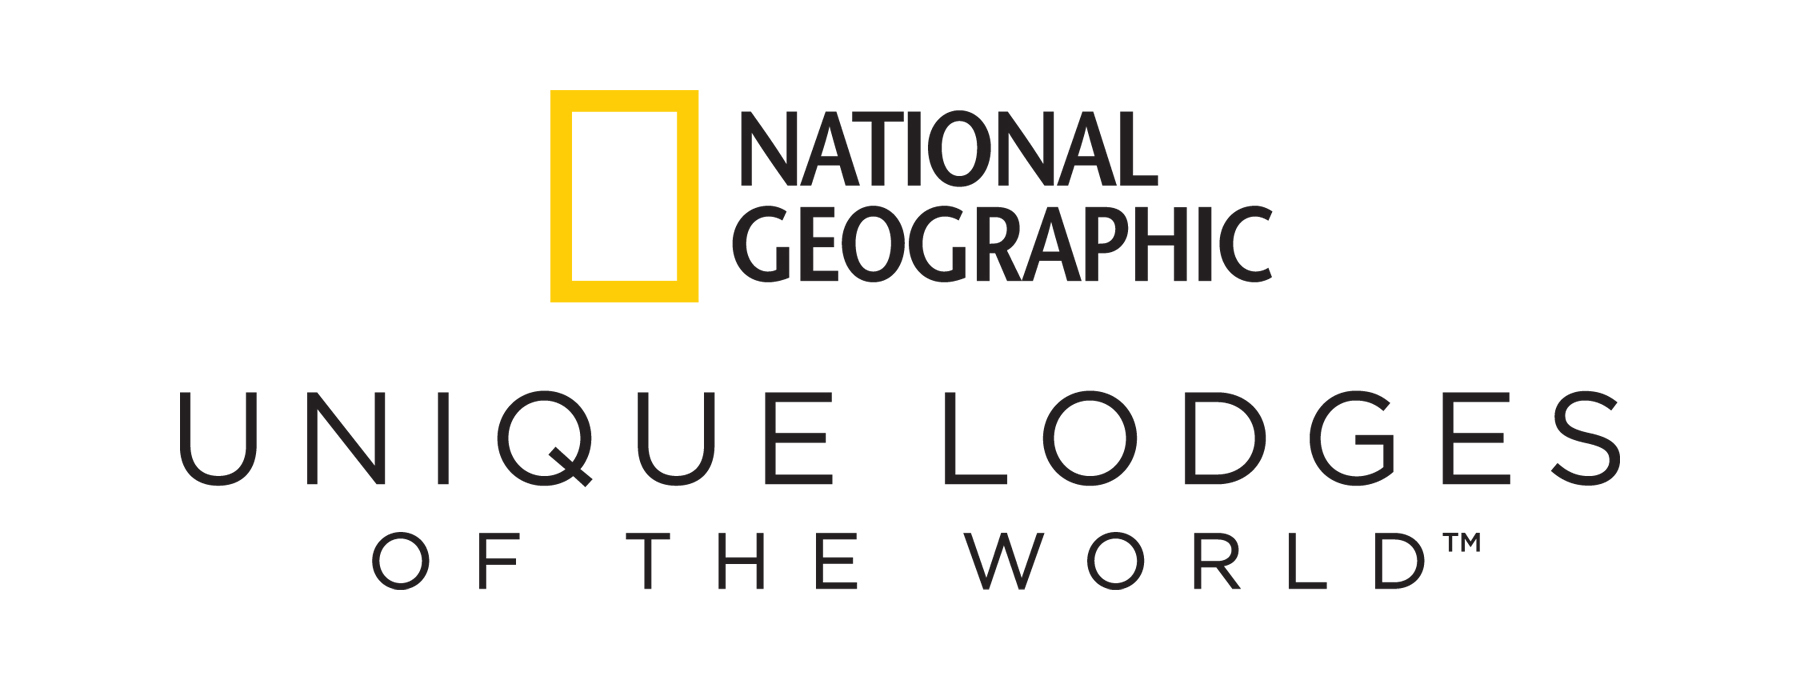 National Geographic Unique Lodges of the World